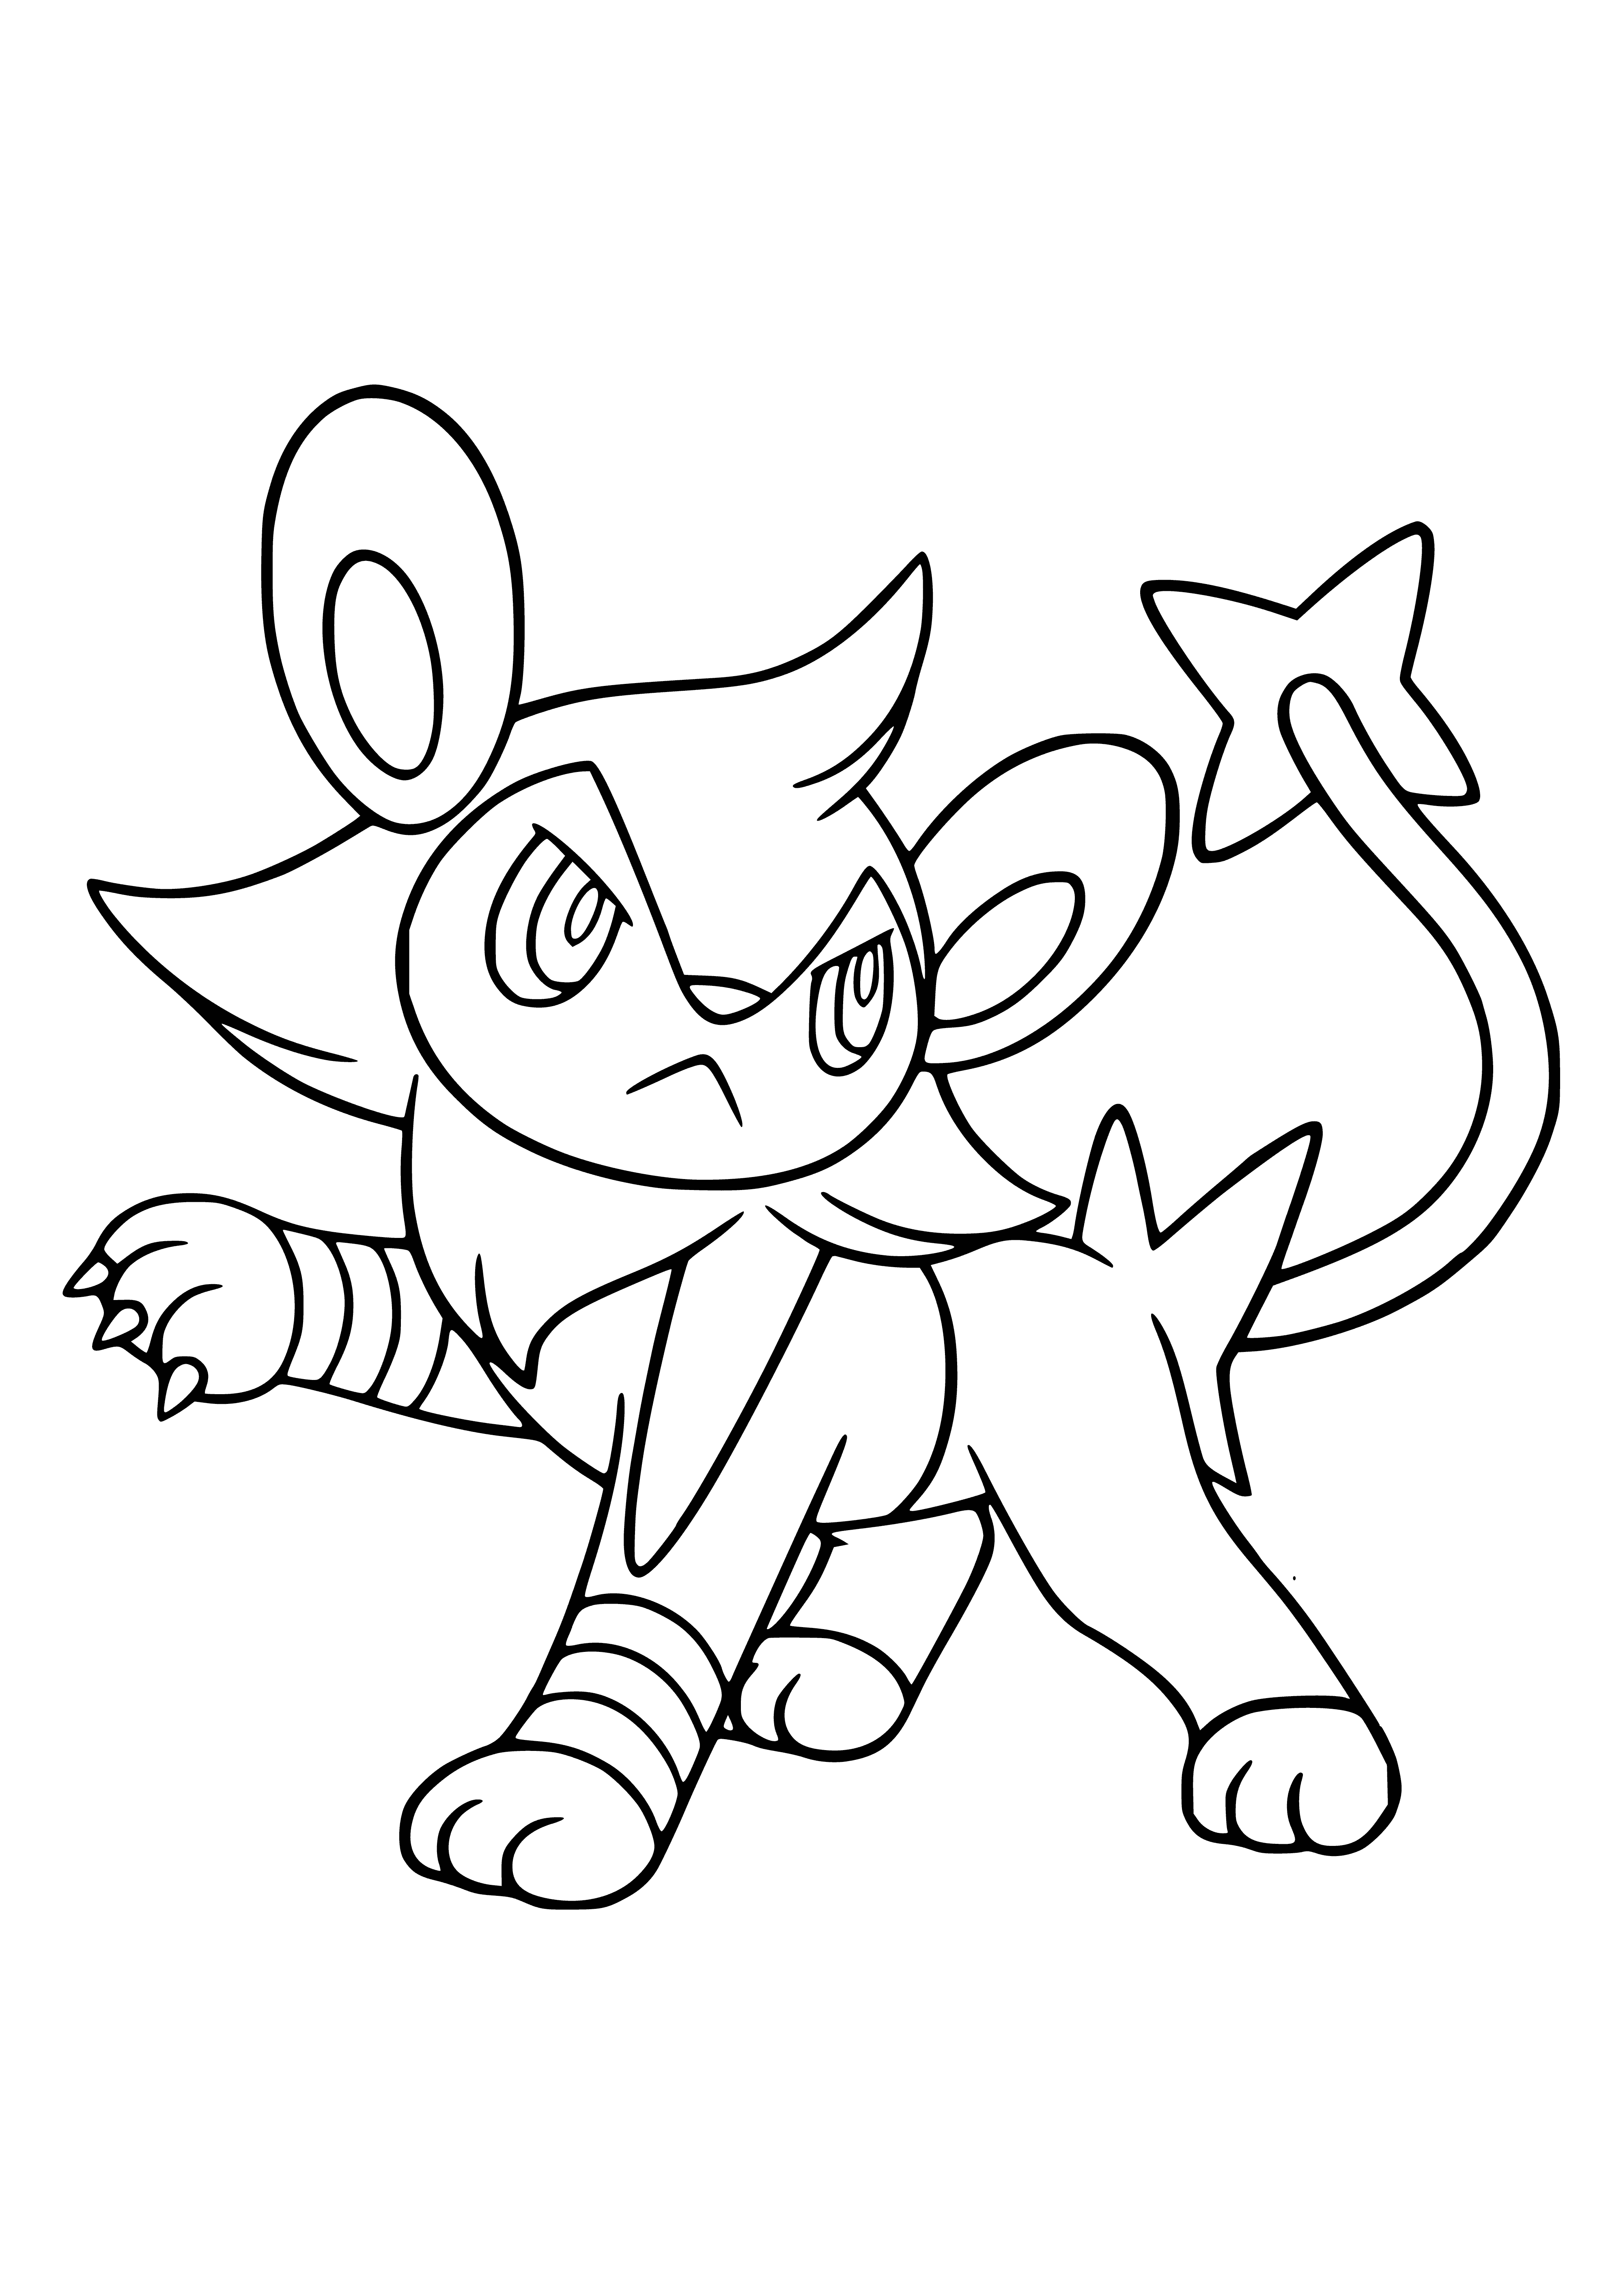 coloring page: Pokémon Luxio is a pale blue mammal with dark blue fur, black eyes & nose, and a black tail w/blue tips. Its legs have blue stripes.